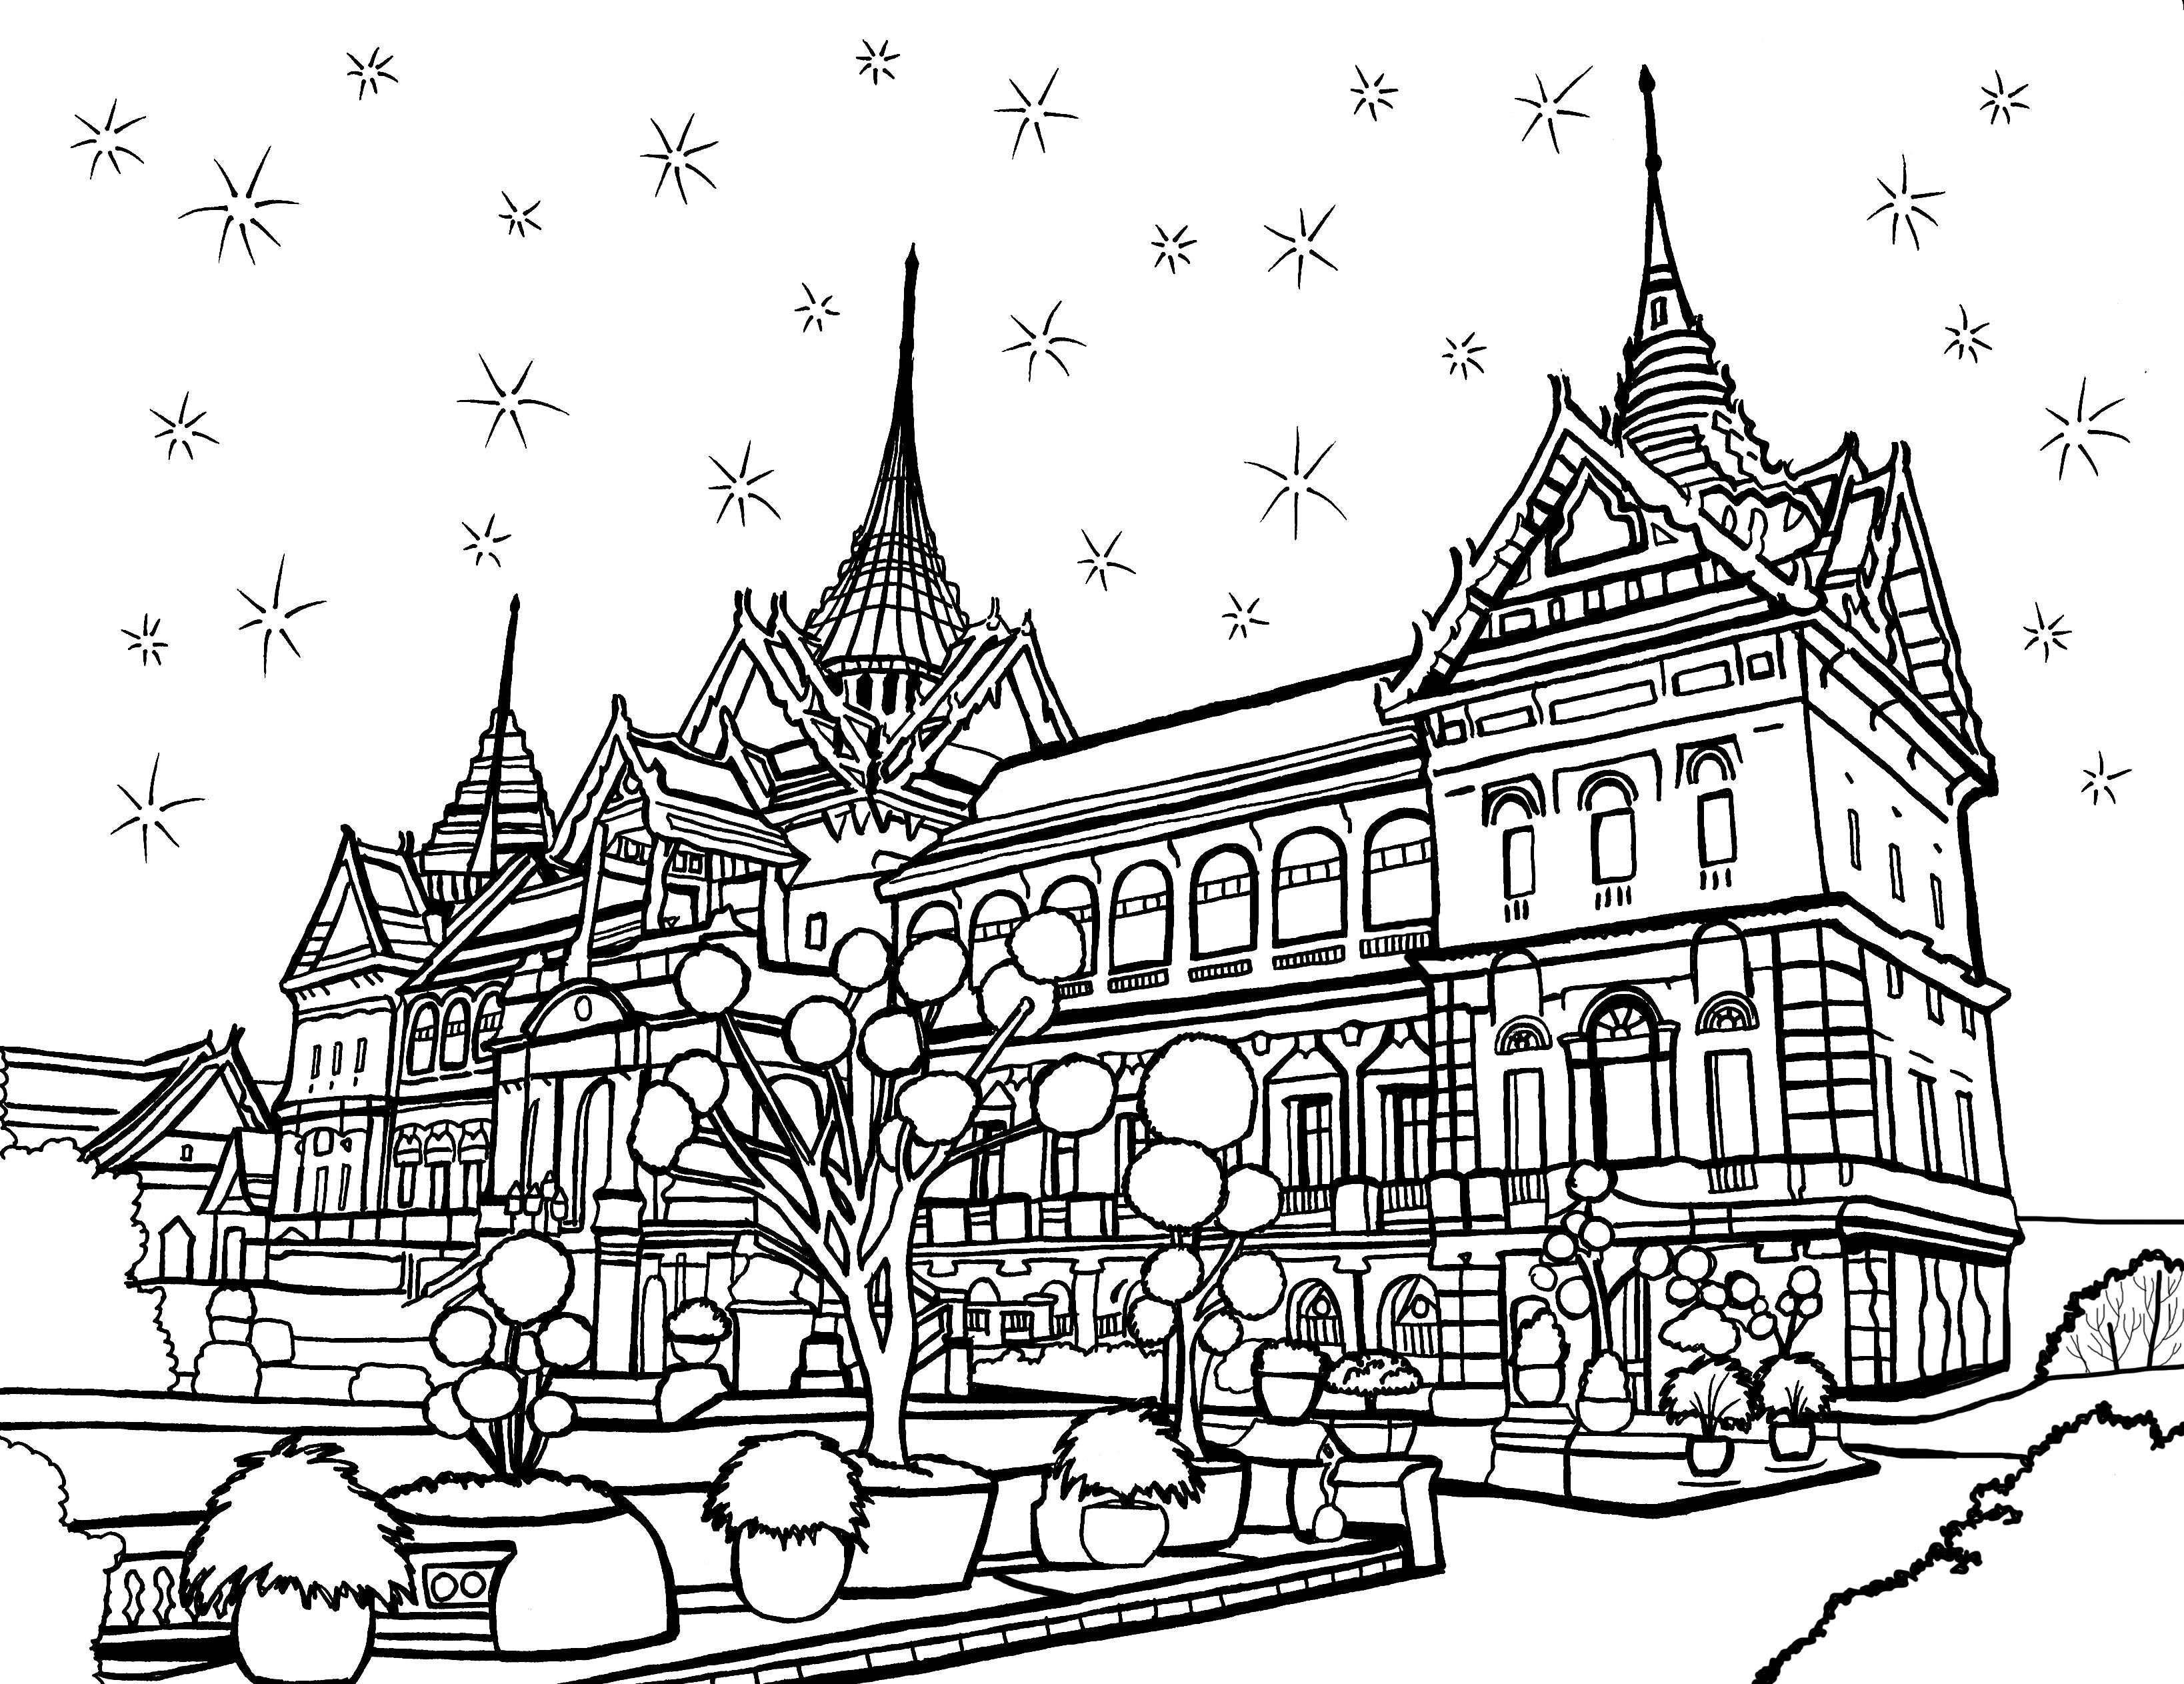 Detailed black and white coloring page depicting the Grand Palace in Bangkok, Thailand, showcasing its elaborate architecture with multiple tiers of roofs, ornate spires, and decorative elements. The palace is surrounded by stylized trees and topiaries, with a clear, star-embellished sky above. This intricate illustration invites a relaxing coloring experience, allowing for personal creativity in bringing the historical landmark to life with color. Free coloring page :: You-Color